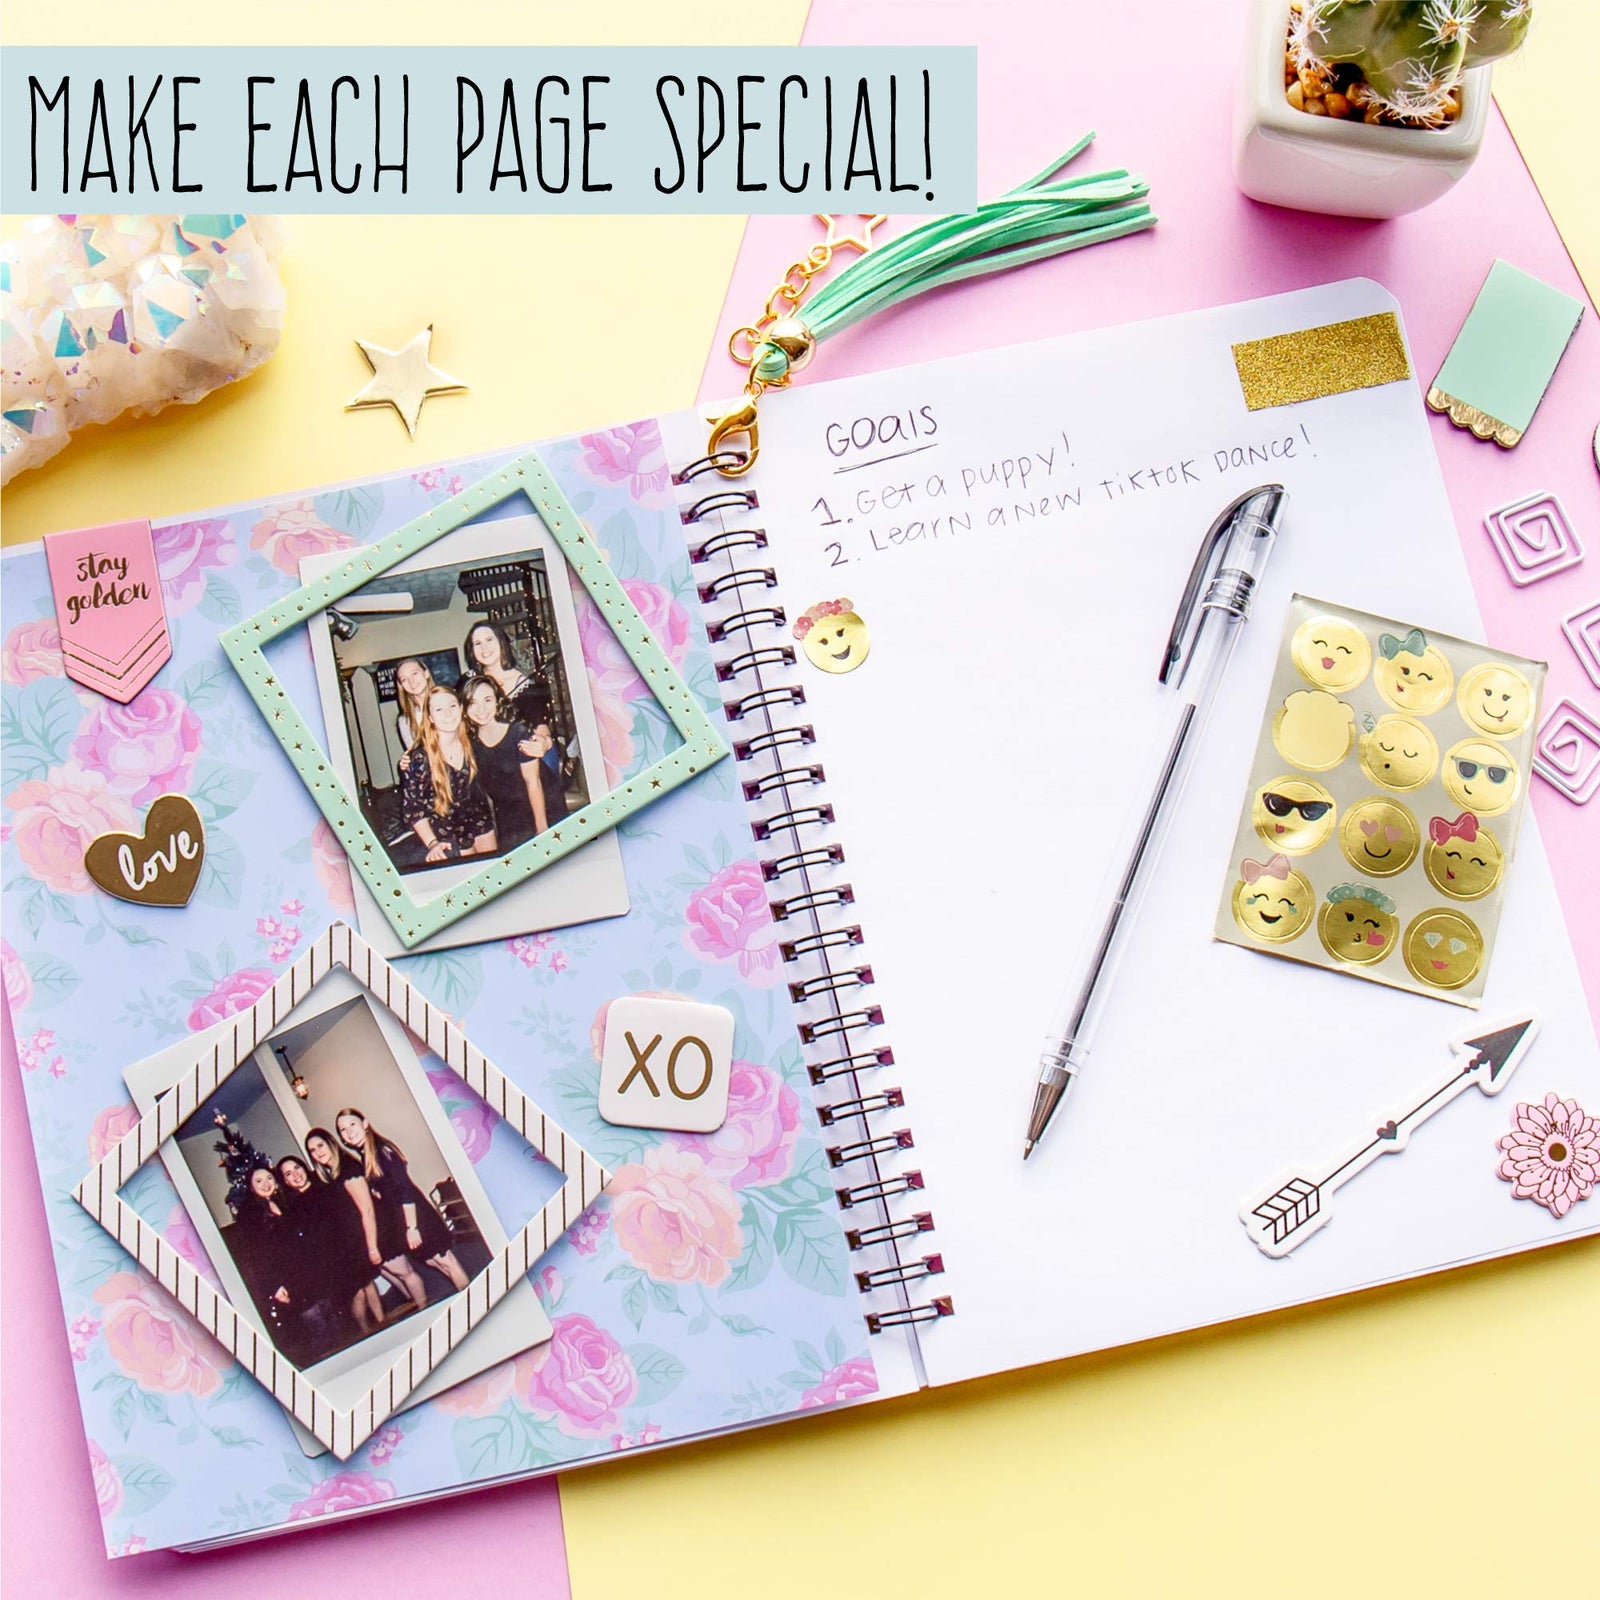 STMT DIY Journaling Set - Personalize & Decorate Your Planner/Organizer/Diary/Journal with Stickers, Gems, Glitter Frames & Clips, Bookmarks, Tassel Keychain - Great Gift Idea for Women and Teen Girls